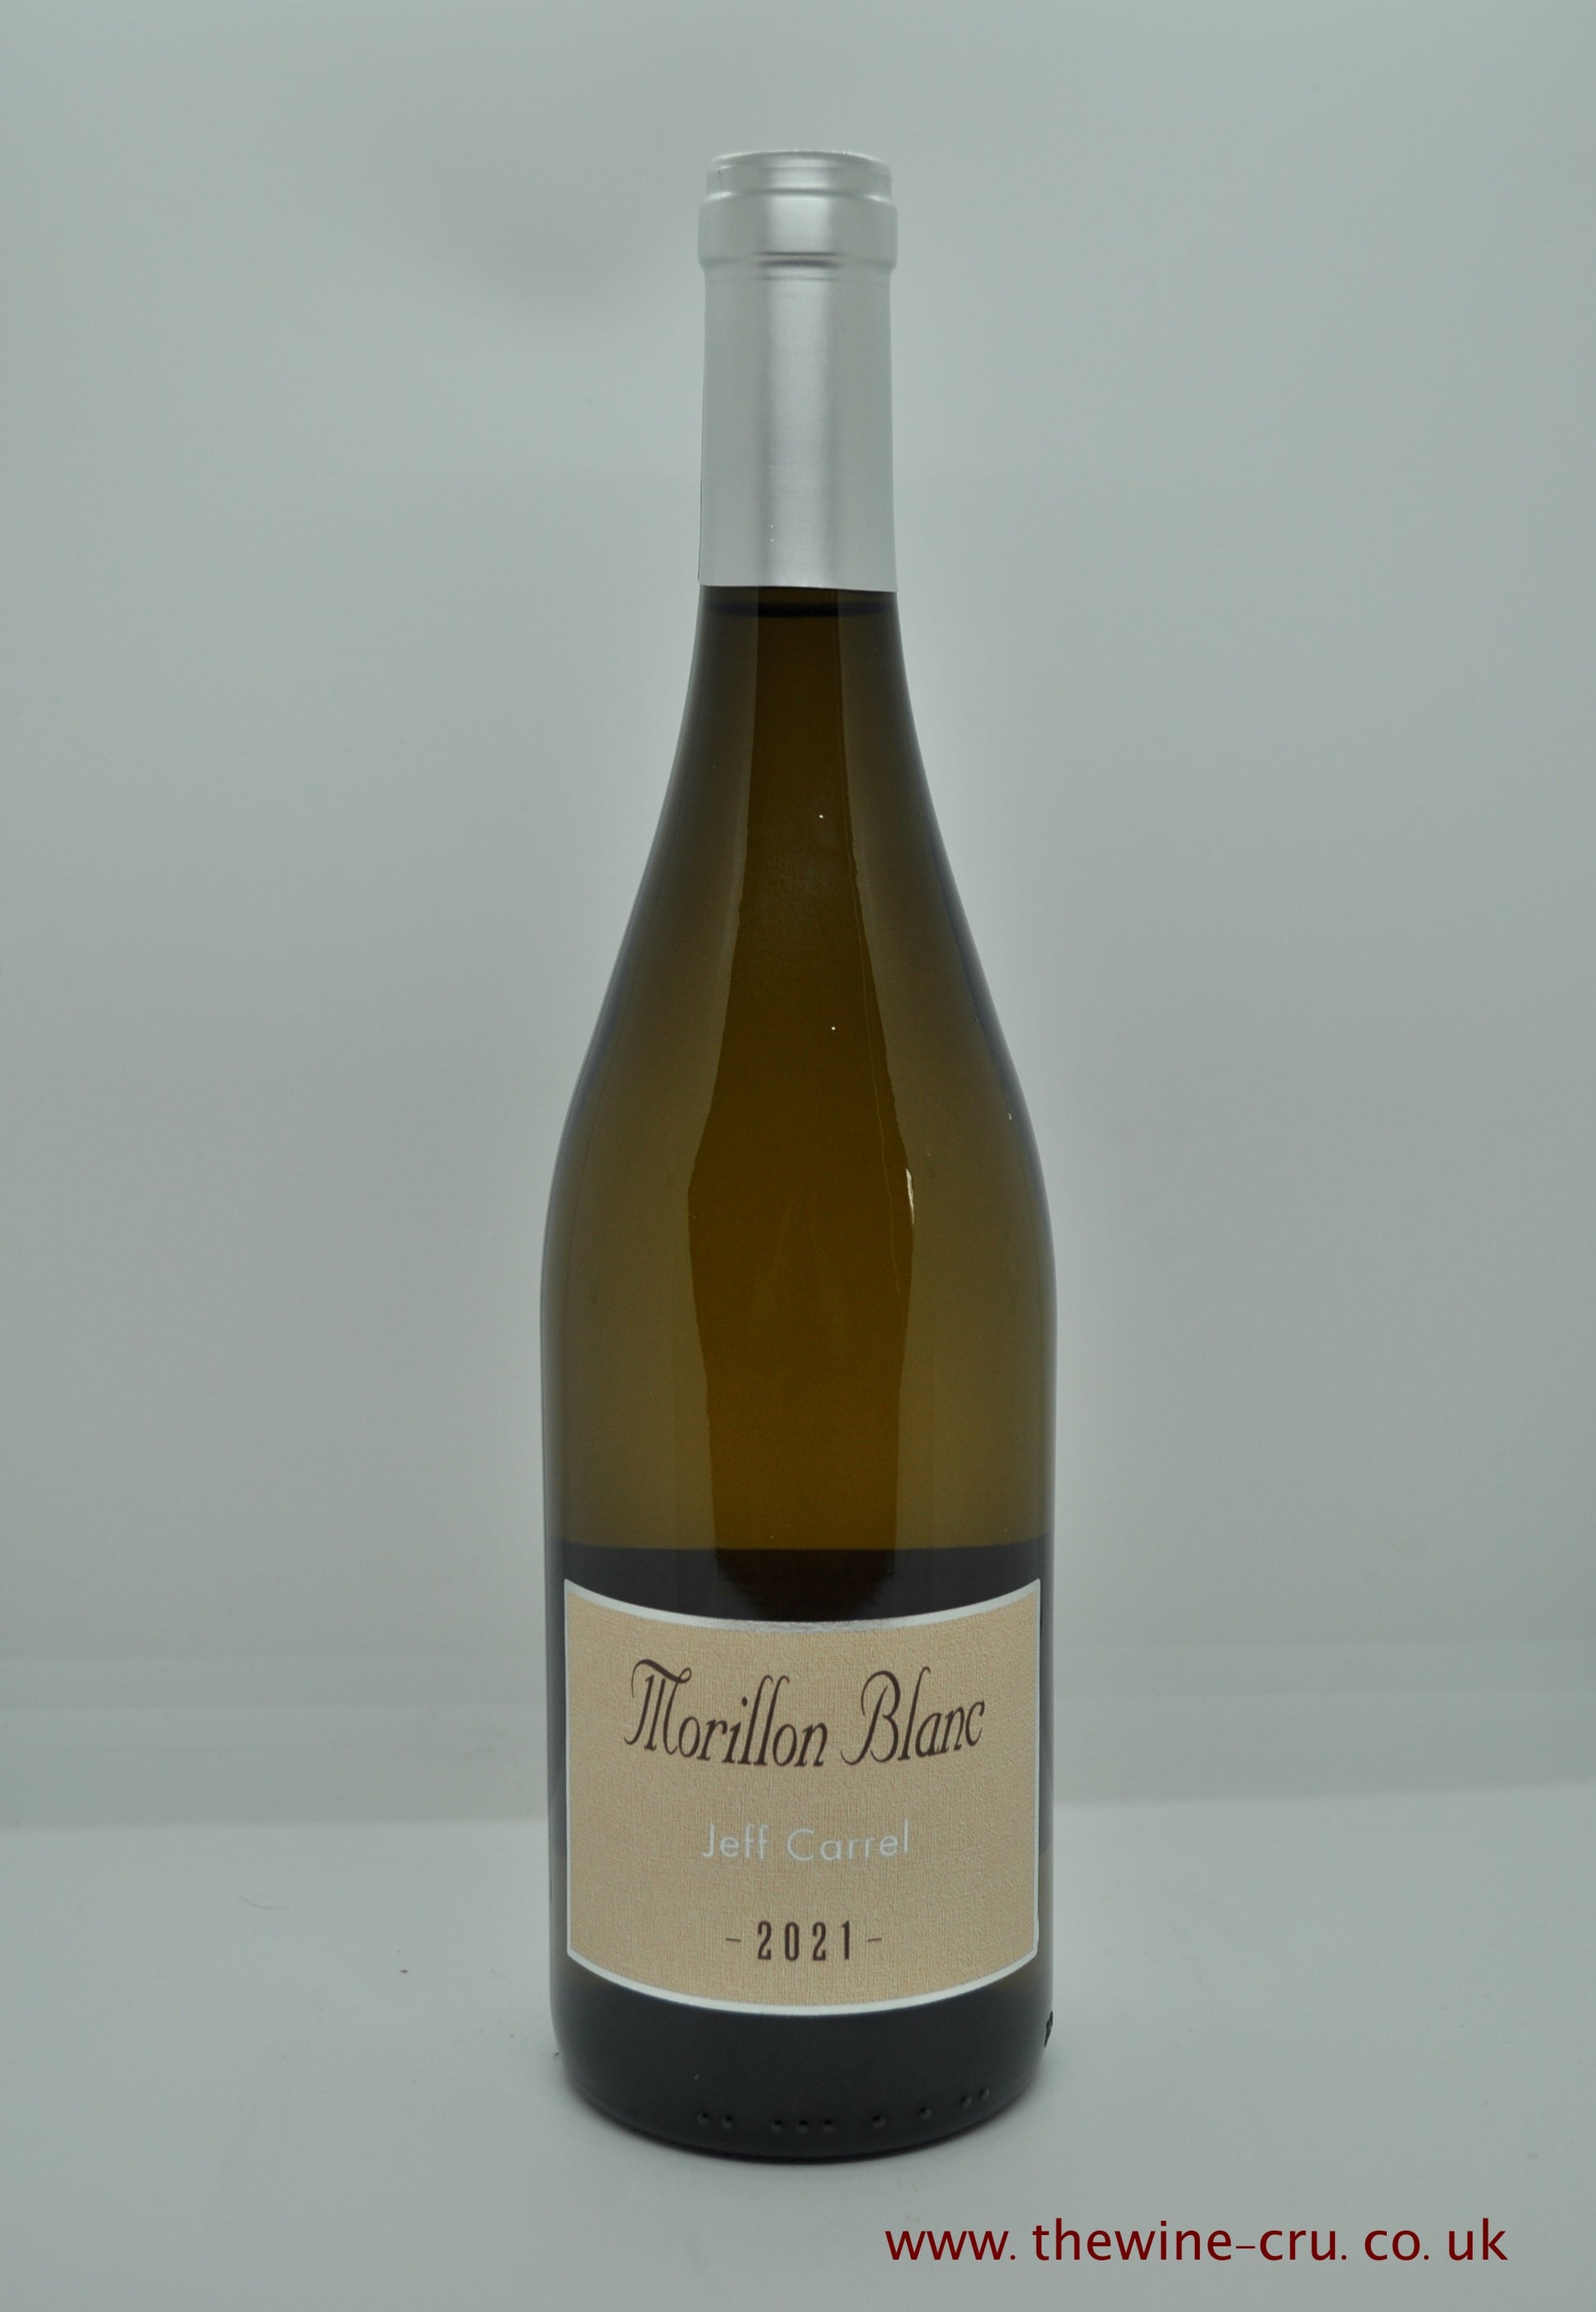 2021 vintage white wine. Morillon Blanc Jeff Carrel 2021. France. Immediate delivery. Free local delivery. Gift wrapping available.